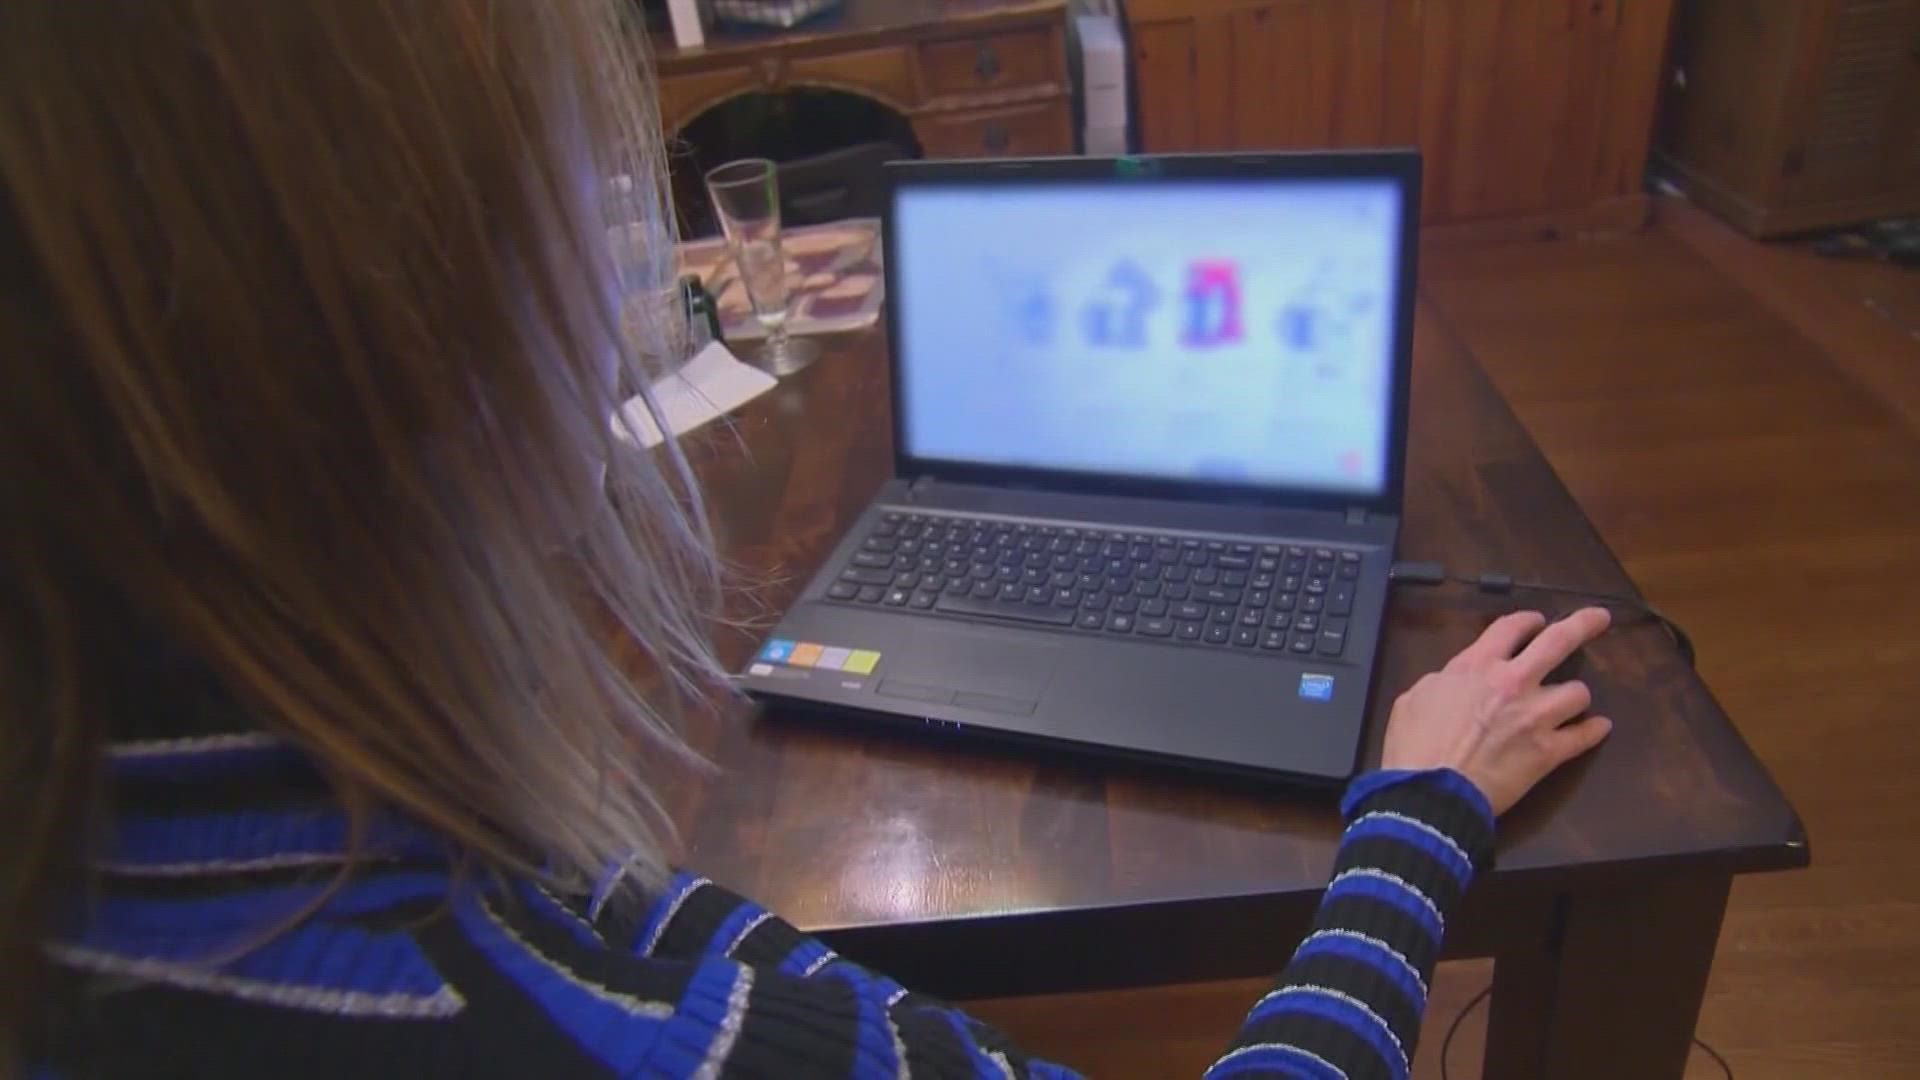 Consumer experts are warning shoppers about possible scams and hacks as they shop online for Cyber Monday.